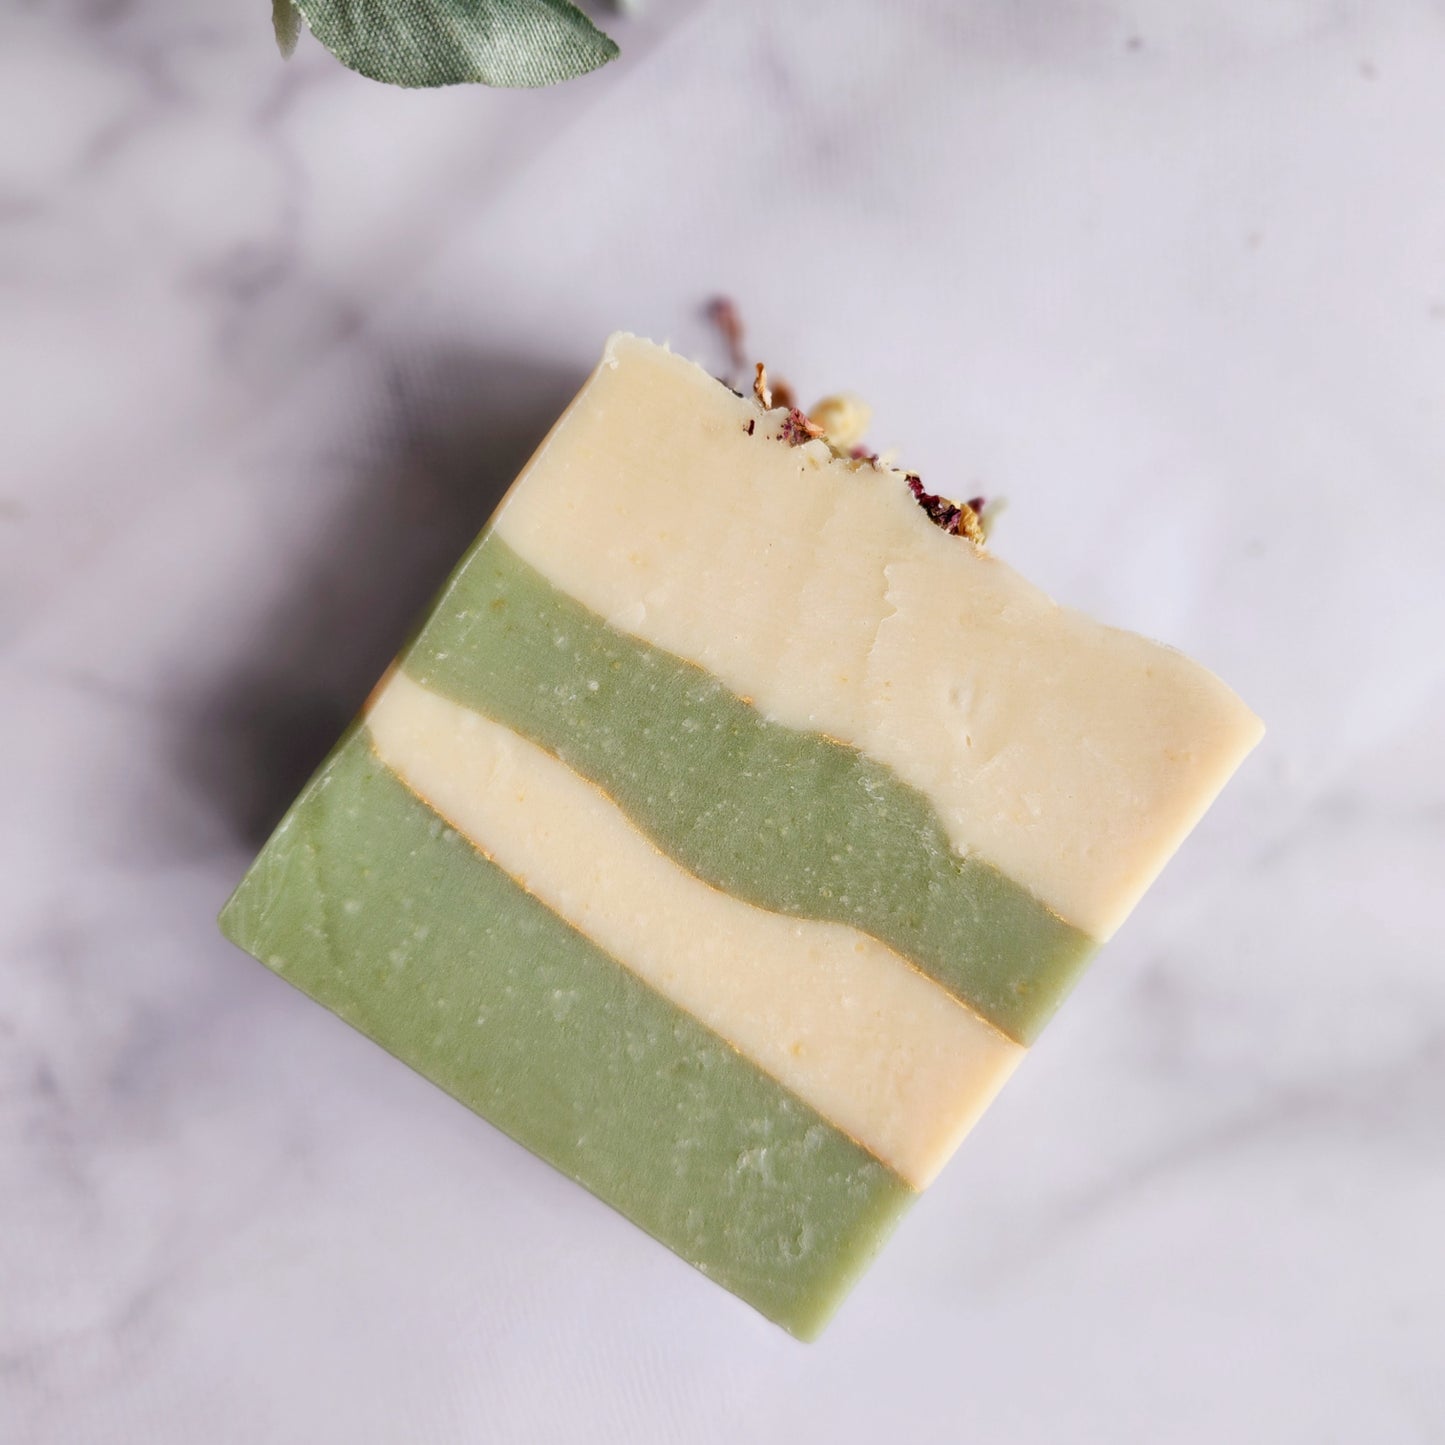 Summer Sage (Marine Nuances and Dried Herbs) - Cow Milk Soap